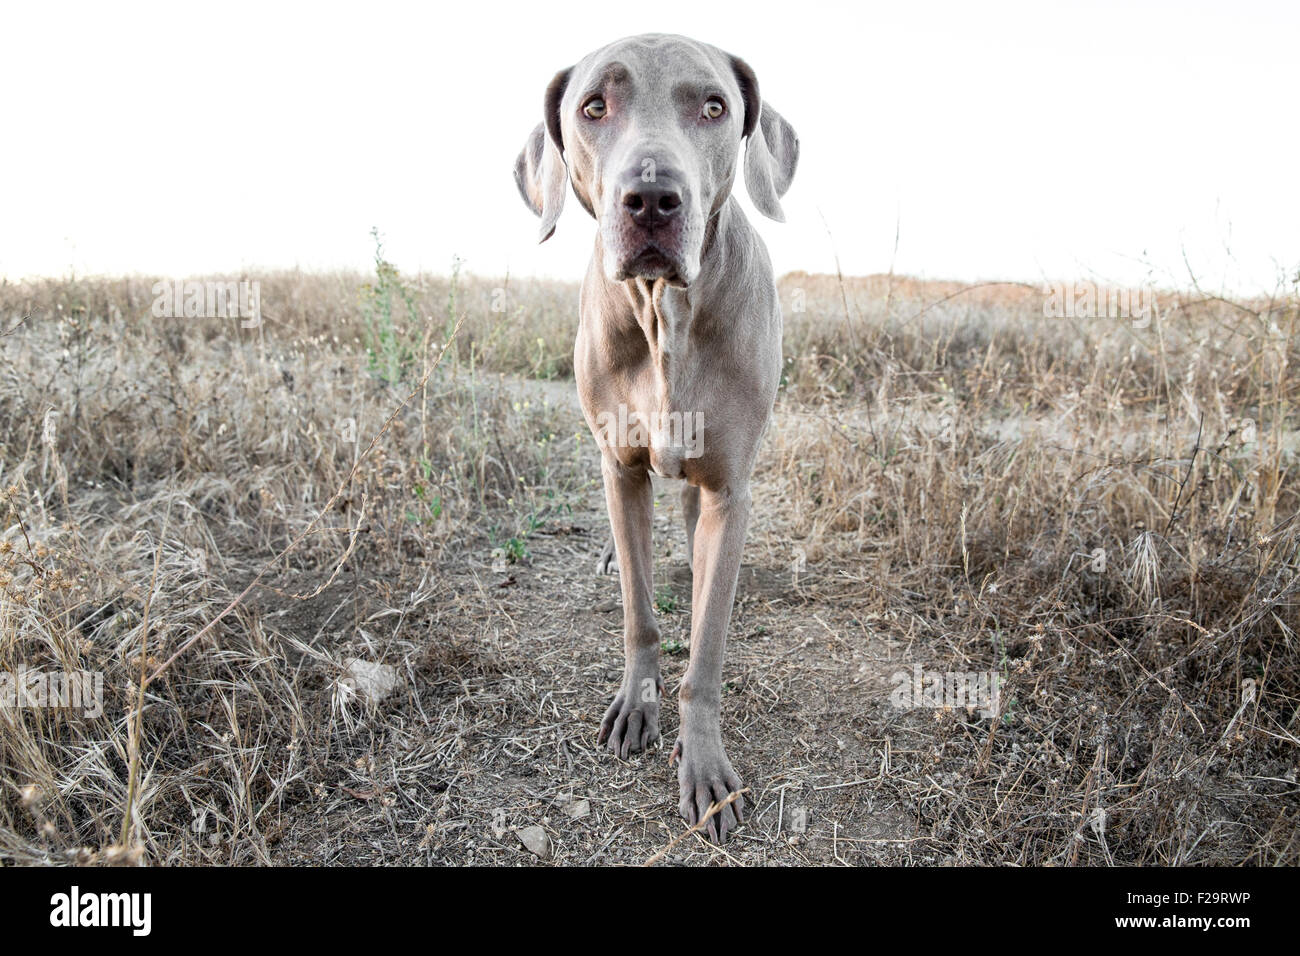 Weimaraner dog facing camera standing on path in dry barren grassy field observing Stock Photo